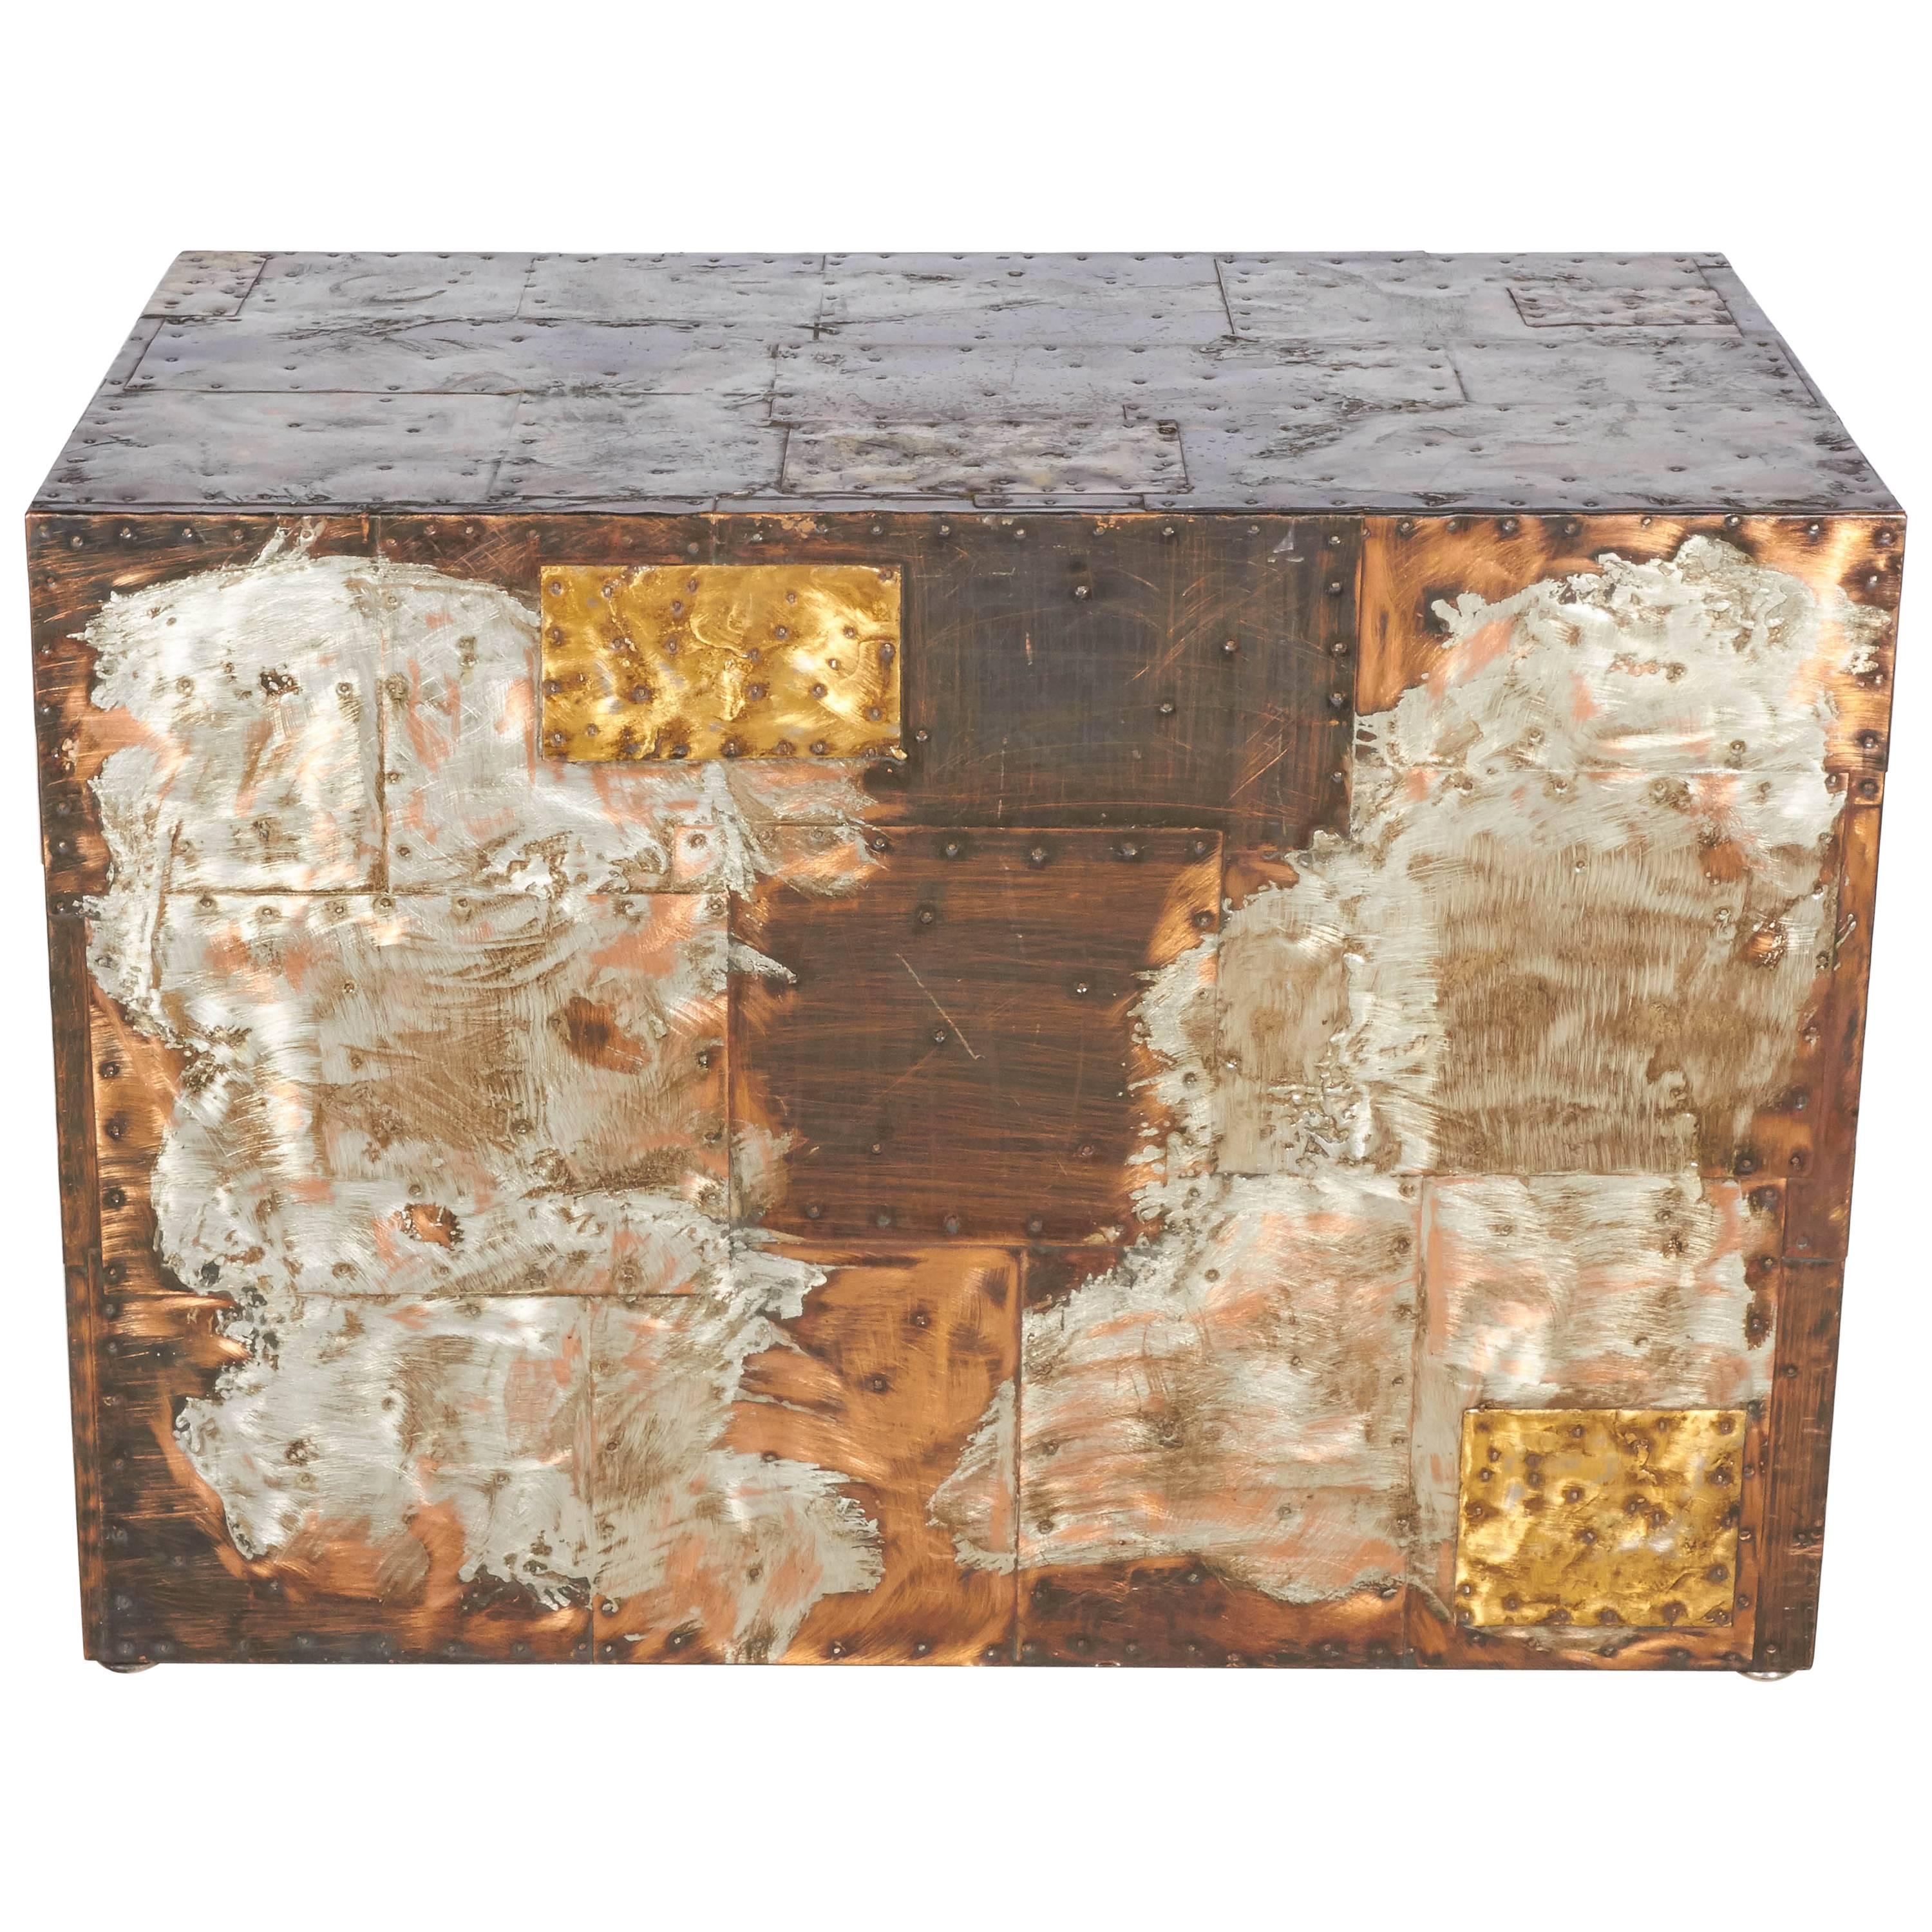 An example from Paul Evans Patchwork series, this piece has Evan's signature mixed metals of steel, copper, and bronze. The metals are welded and riveted and patinated to a wonderful effect. The piece is versatile in size and function and can be